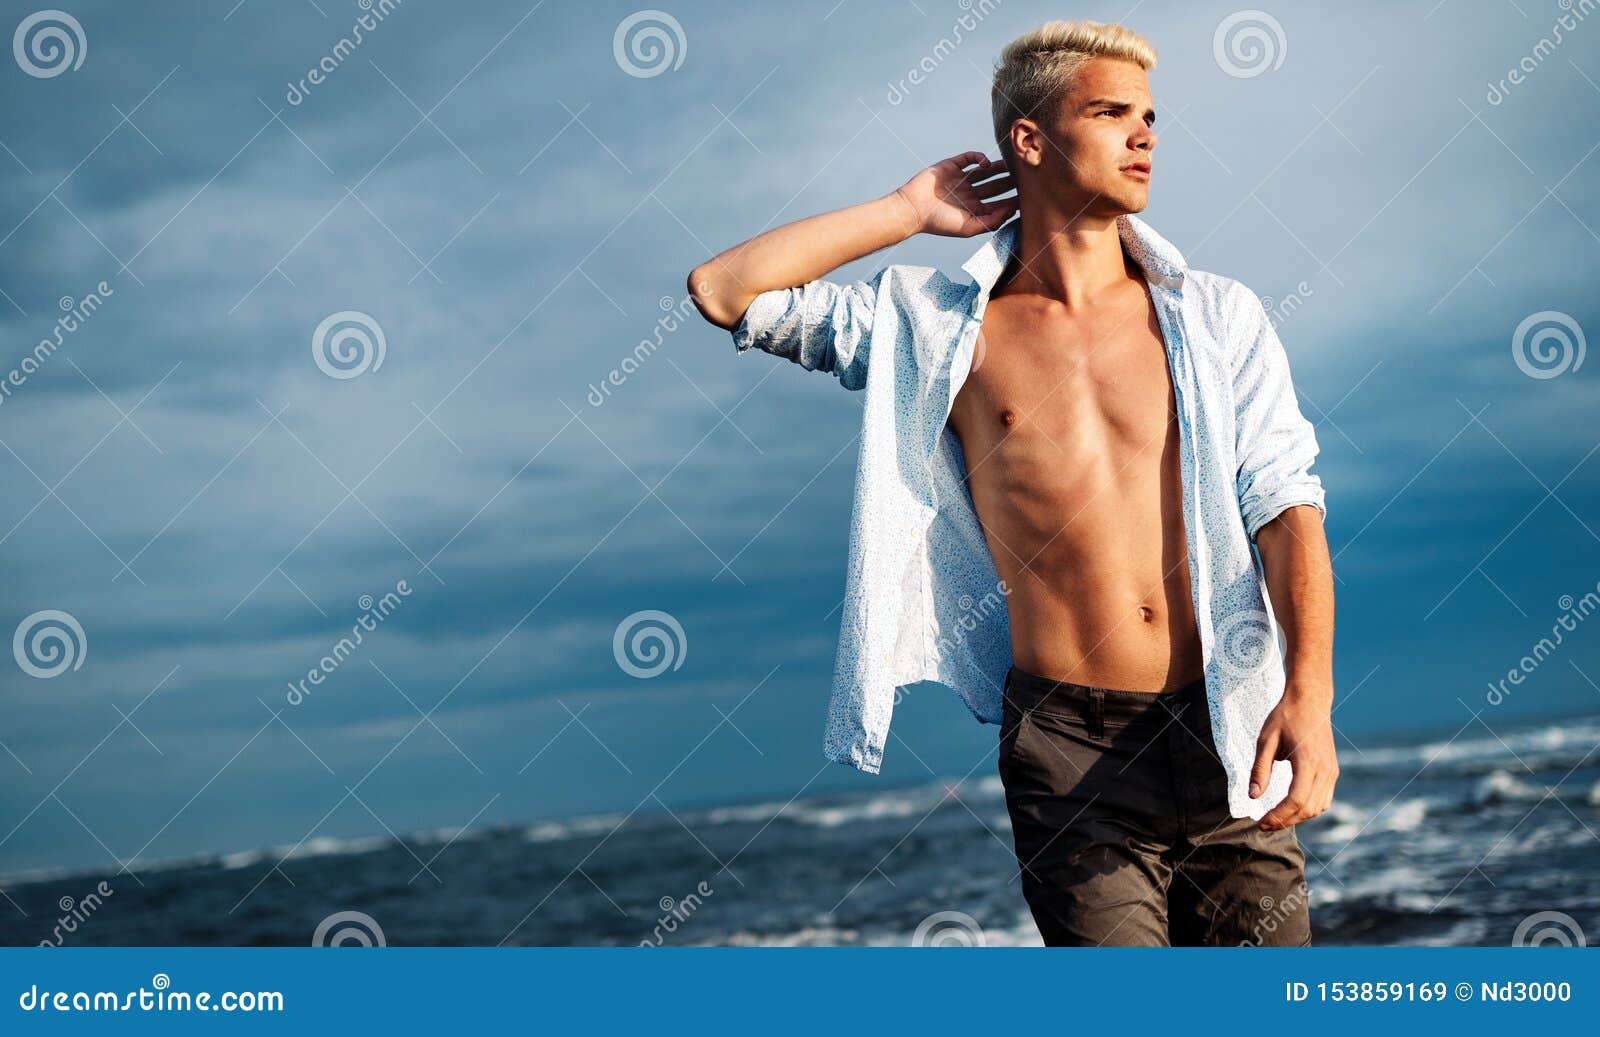 Handsome Man Standing at Sea Beach while on Vacation Stock Image ...